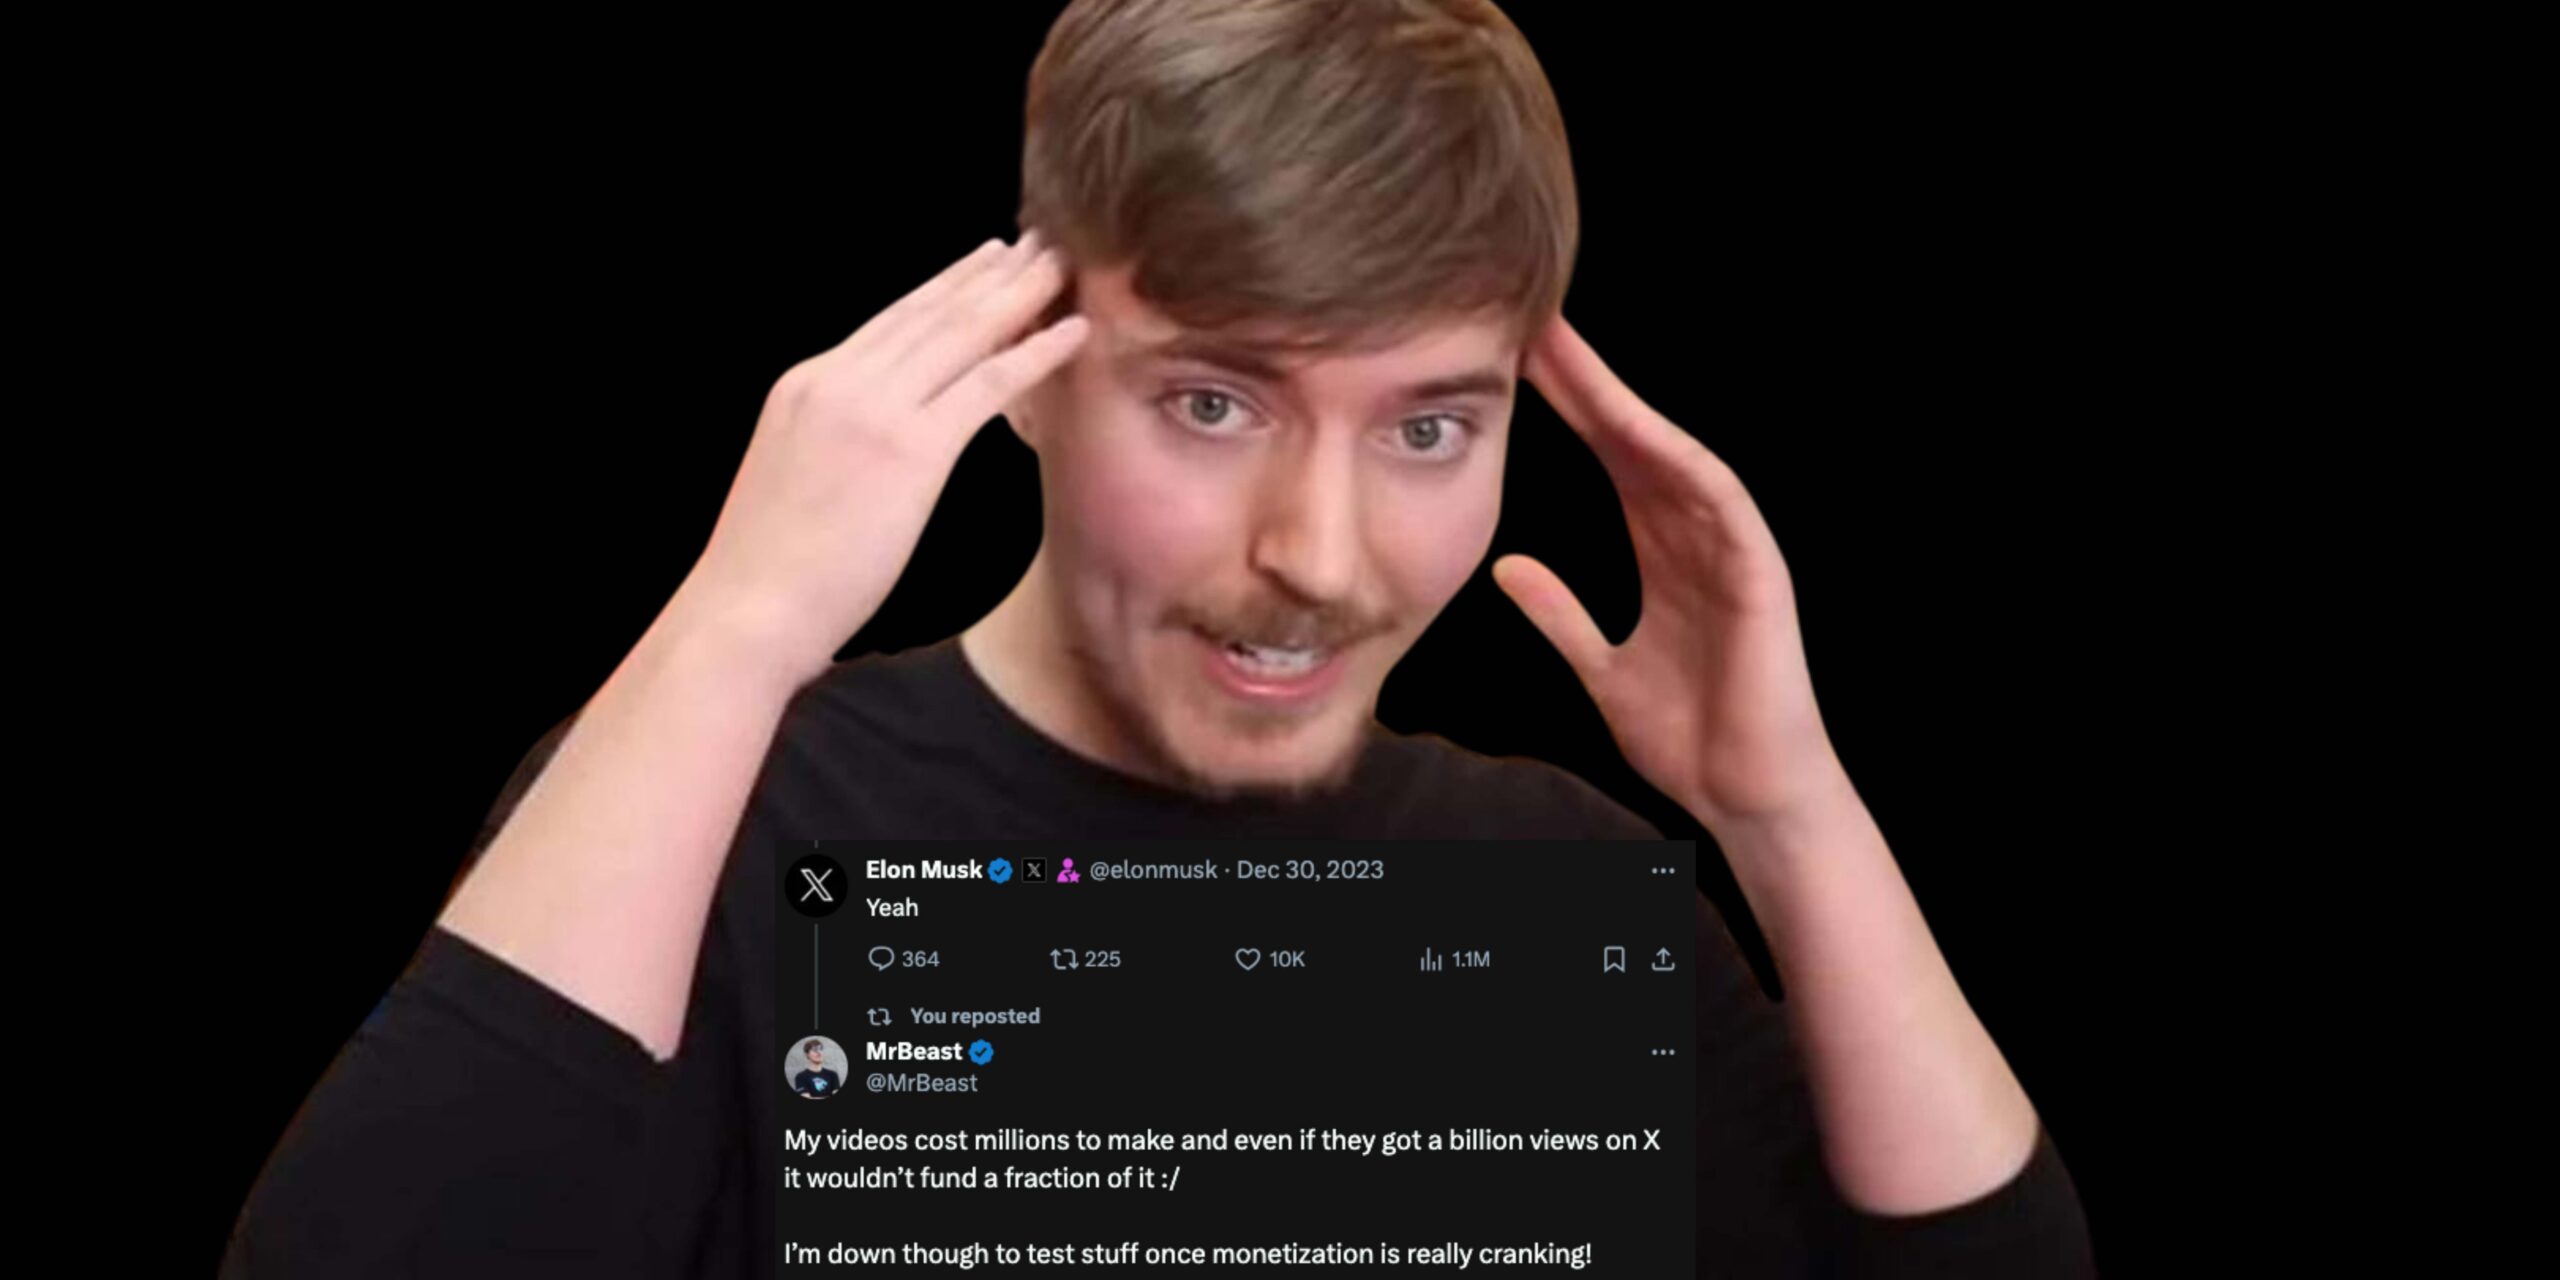 MrBeast Claims to Elon Musk a Billion Views on X (Twitter) Won’t Help Fund Even a Fraction of His Videos!